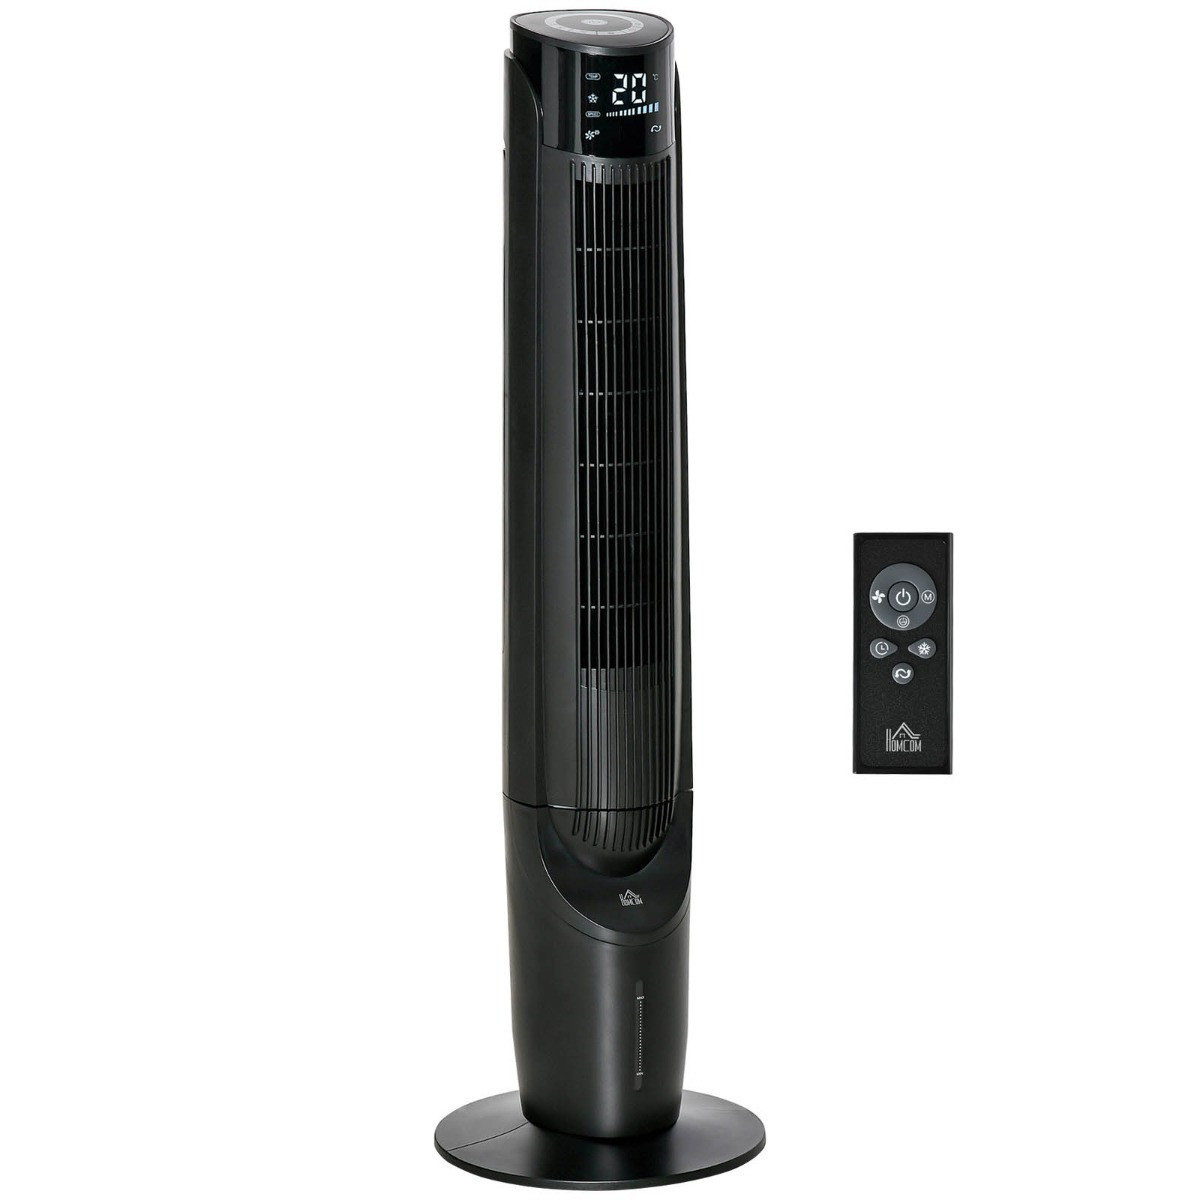 Homcom 42" 4-in-1 Ice Cooling Tower Fan + Water Conditioner - Black>